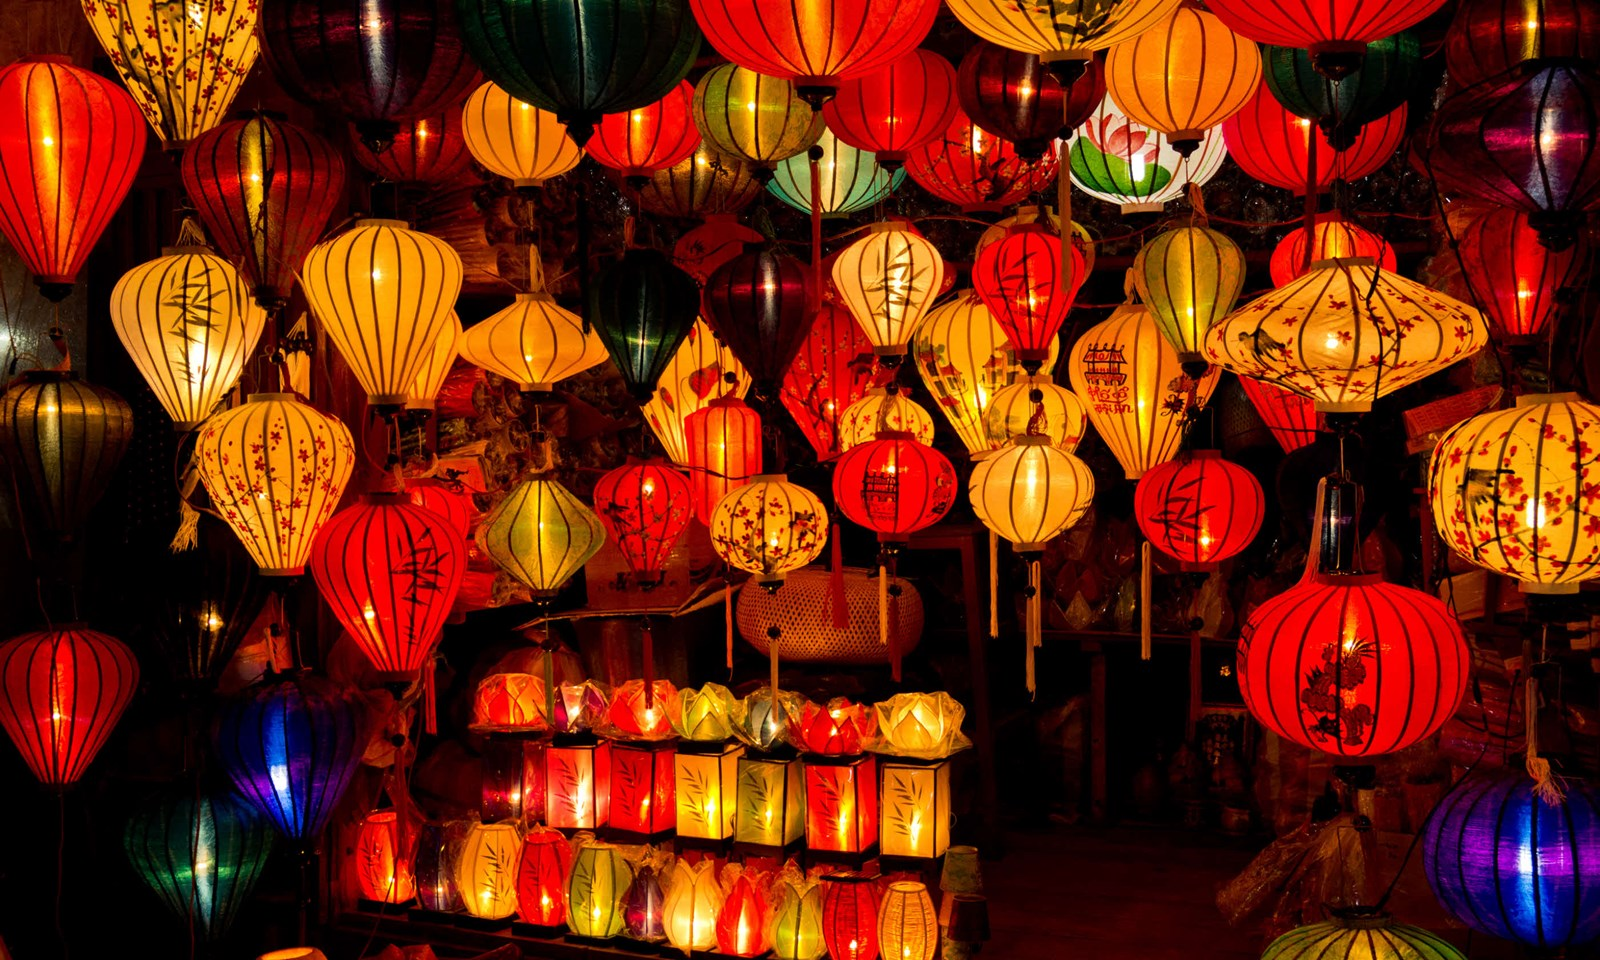 hoi an boasts different charm during covid 19 lockdown